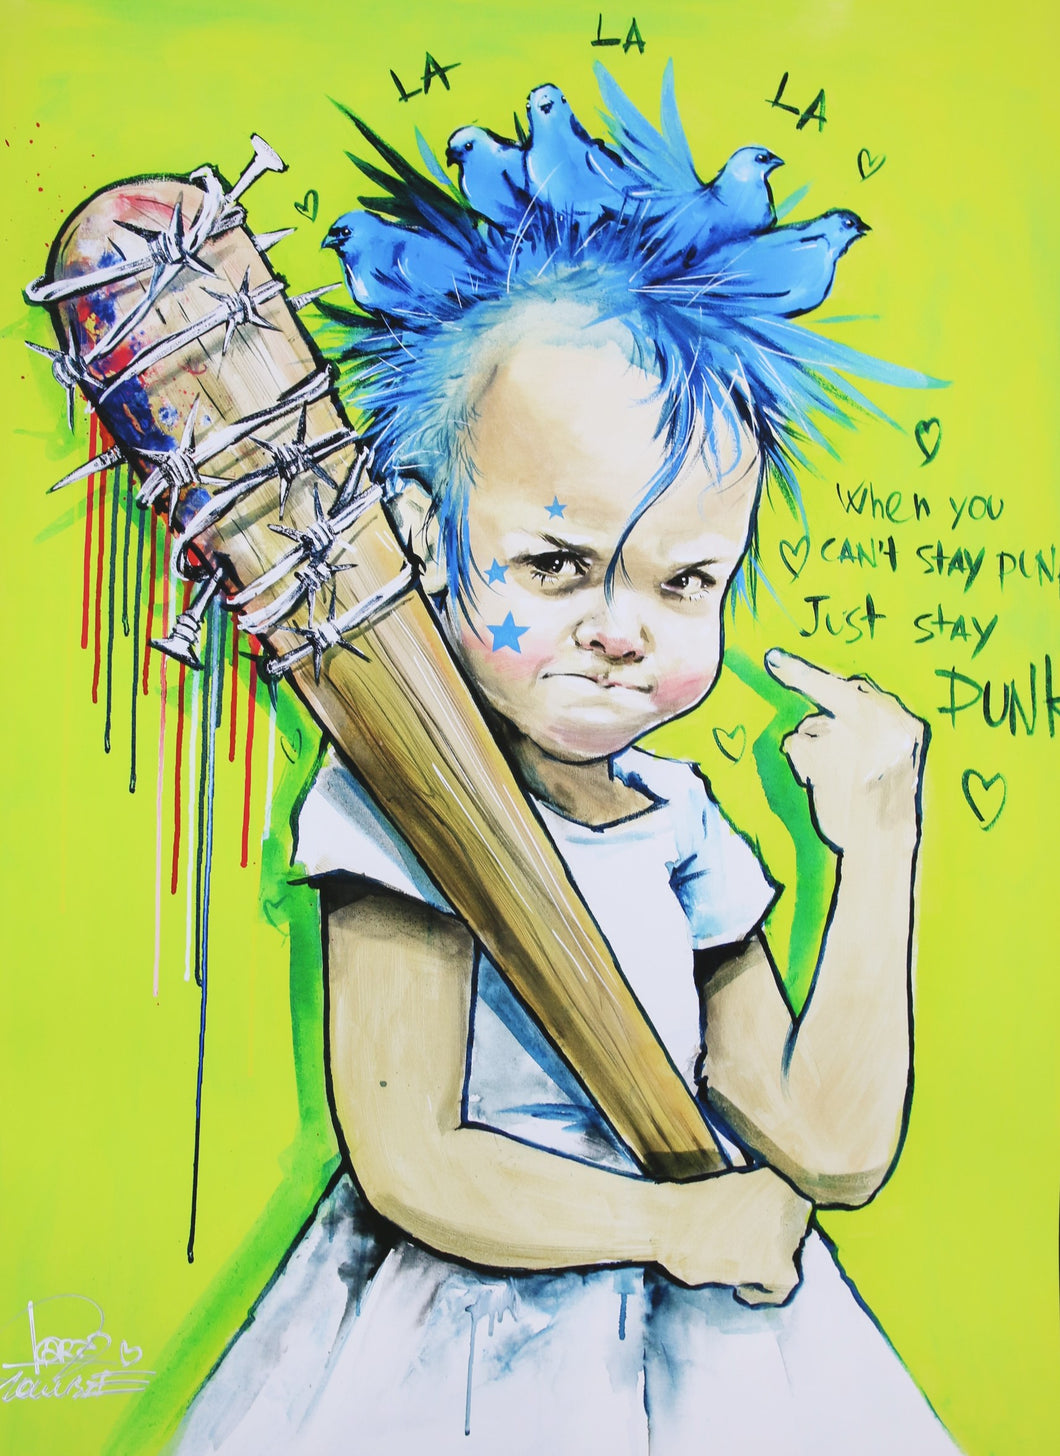 LORA ZOMBIE If You Can't Stay Punk, Just Stay Punk - print